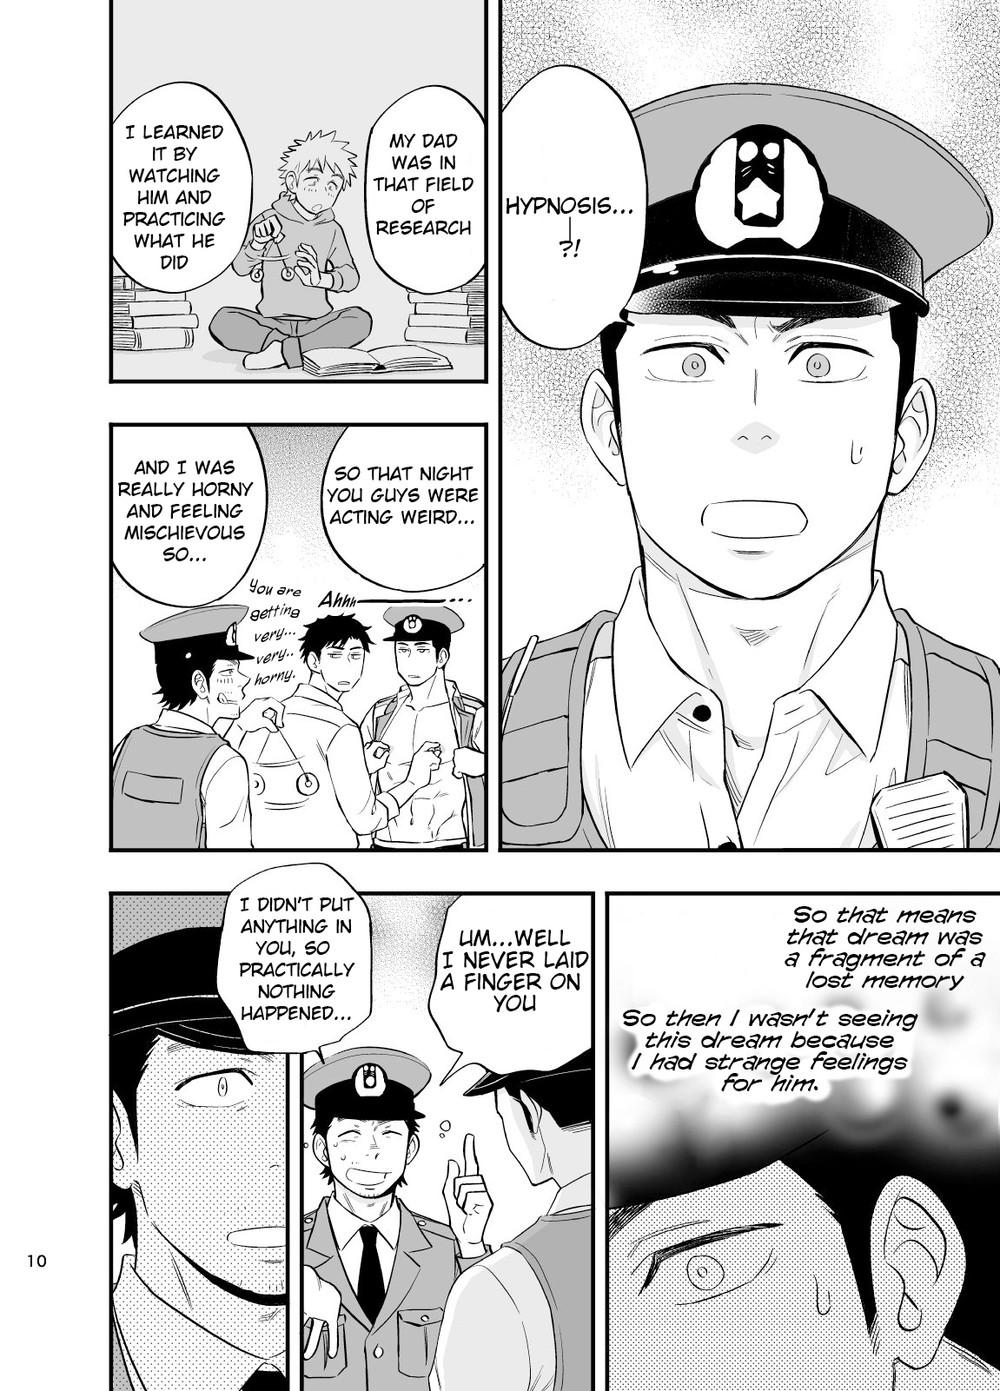 Rubdown Yume no END wa Itsumo xxx | At the End of the Dream There Is Always XXX - Original Gay Money - Page 11